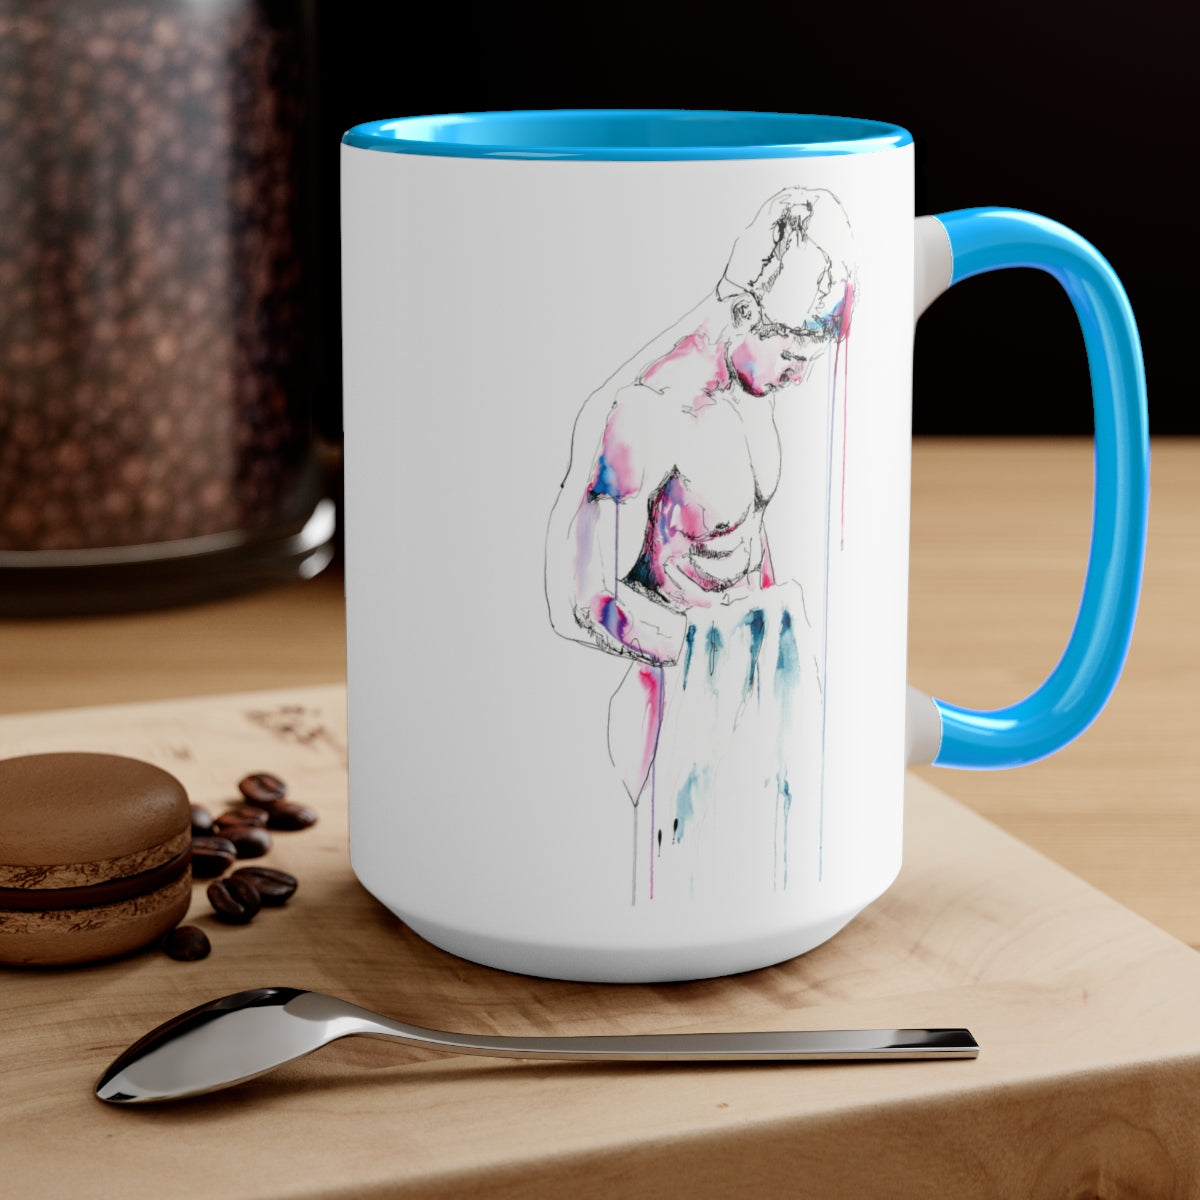 Wet And Out of the Shower - Two-Tone Coffee Mugs, 15oz